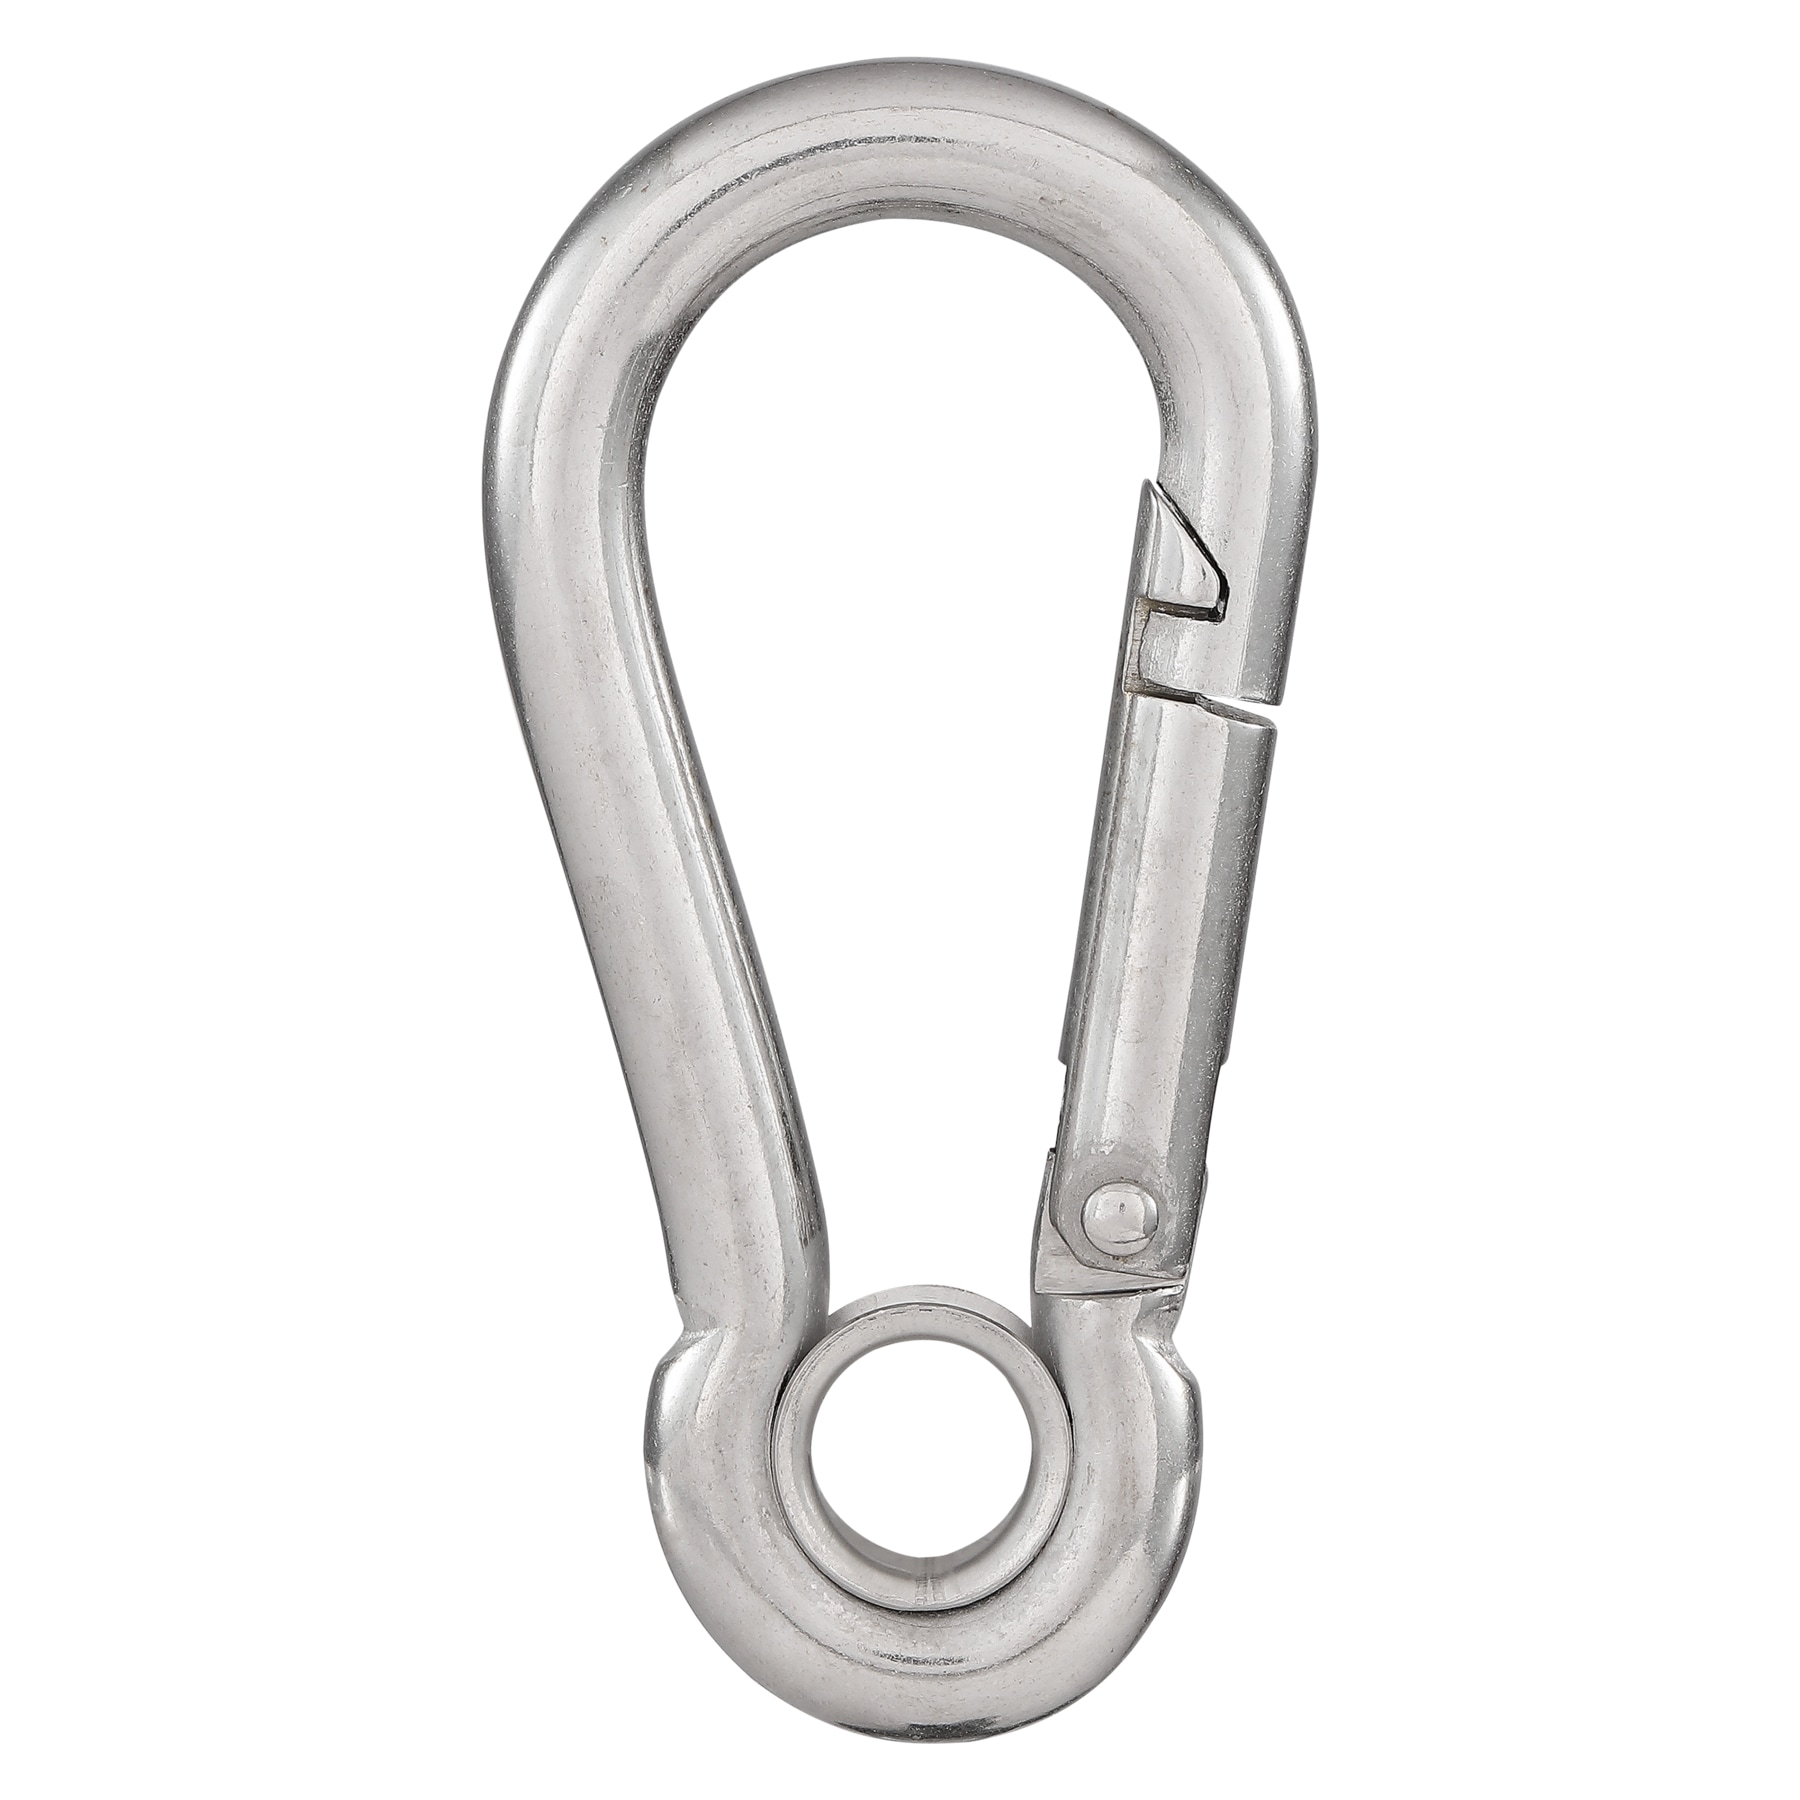 Stainless Steel 316 1 x 3 1/8 Bolt Snap Square Swivel End Marine Grade  Polished - US Stainless